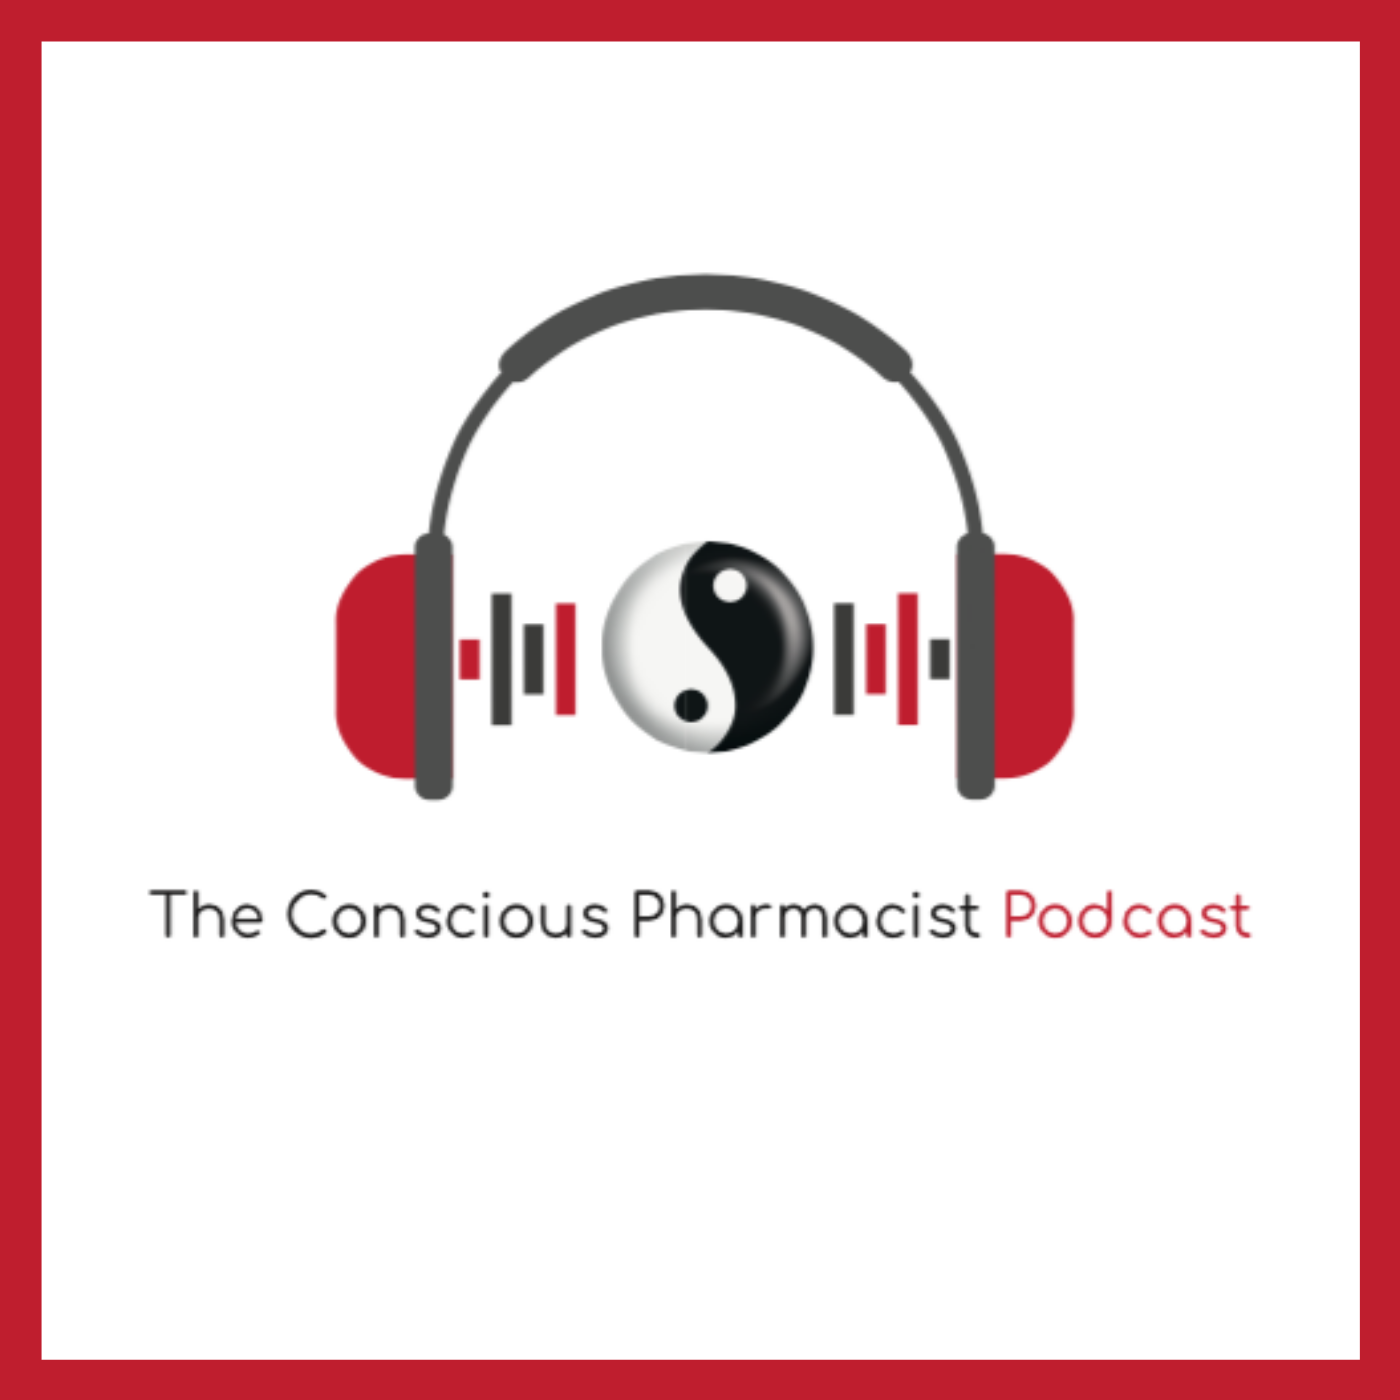 CP1 – Welcome to The Conscious Pharmacist Podcast